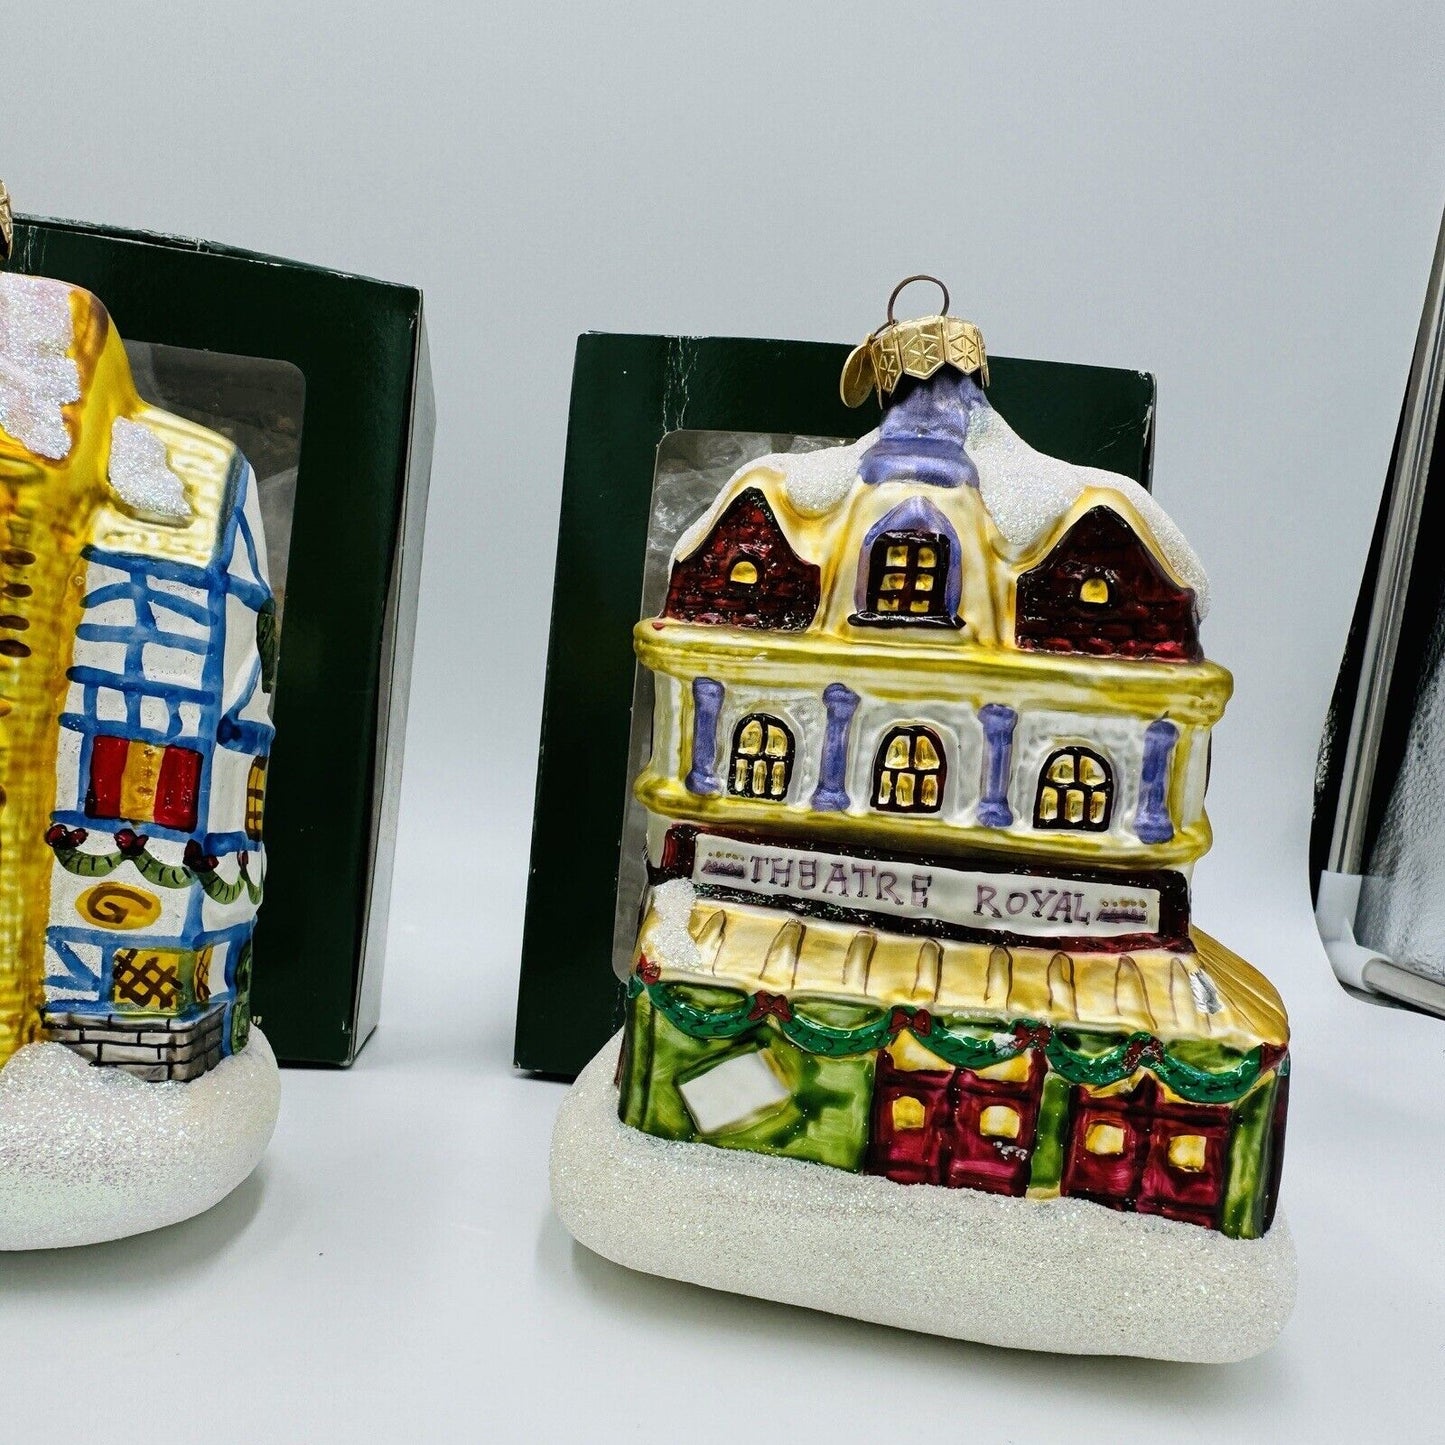 Department 56 Night Before Christmas Dickens Village Glass Ornaments